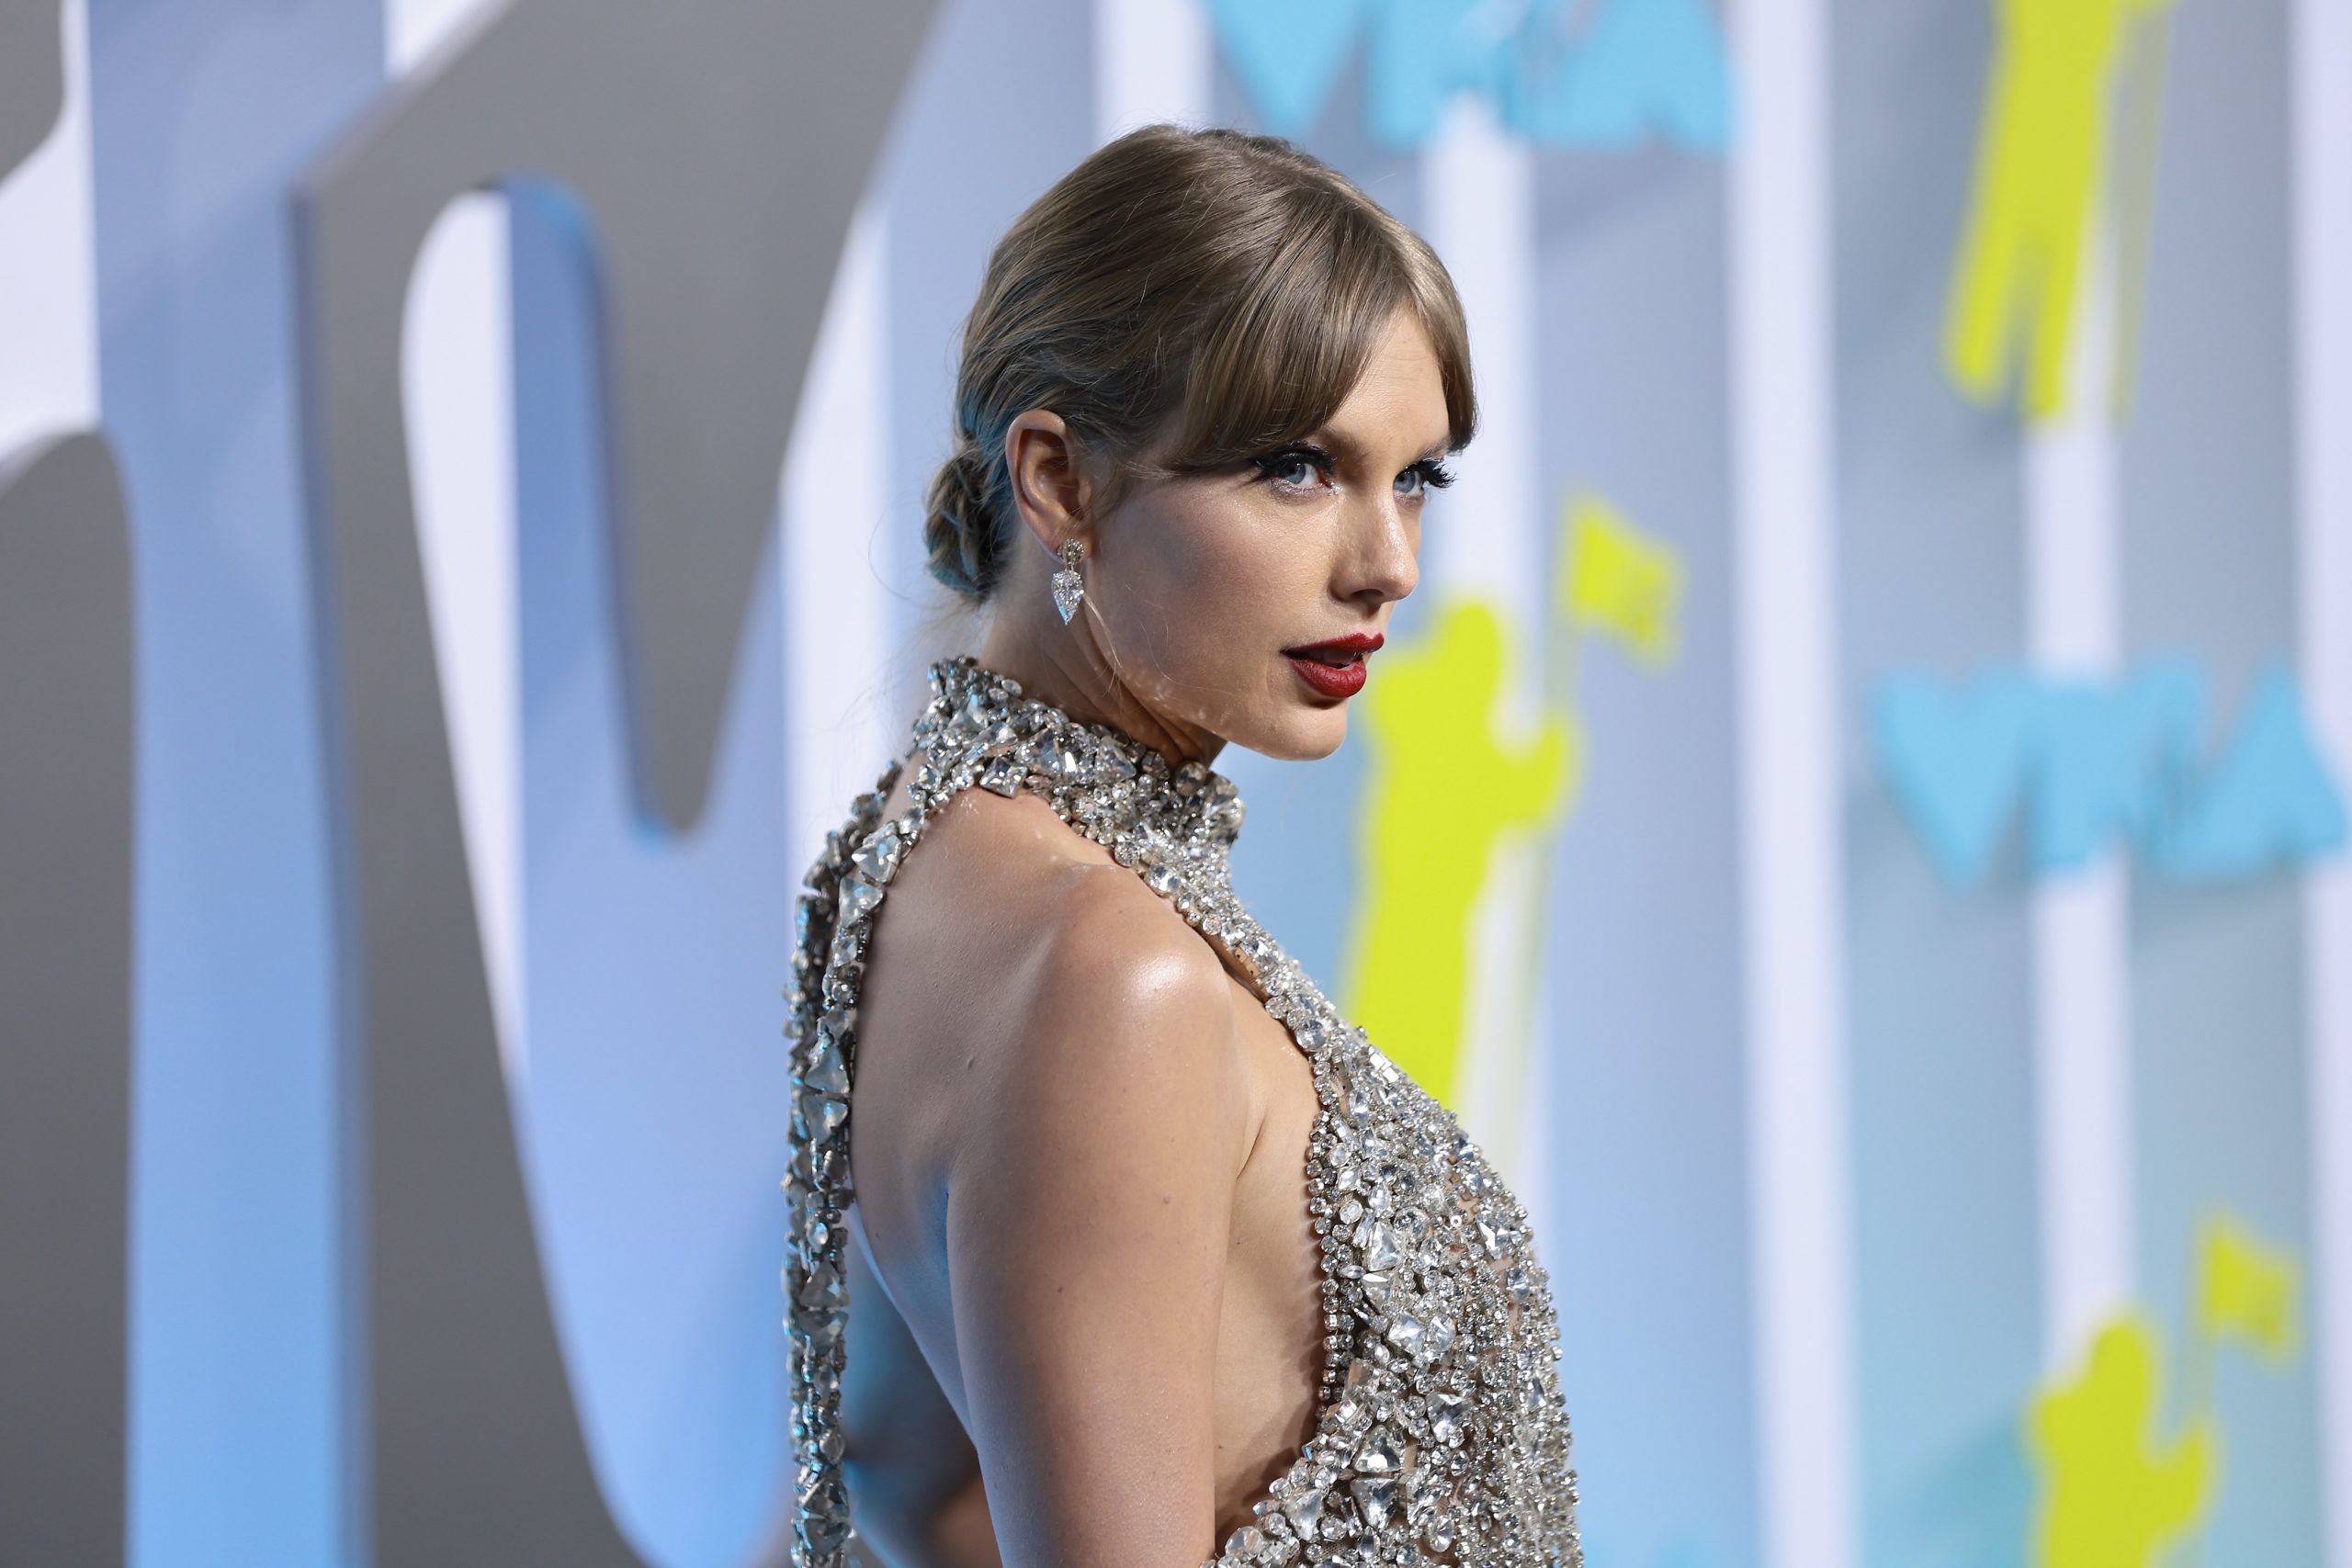 ‘Midnights’ swiftly broke the Spotify record for the most streamed album in a single day